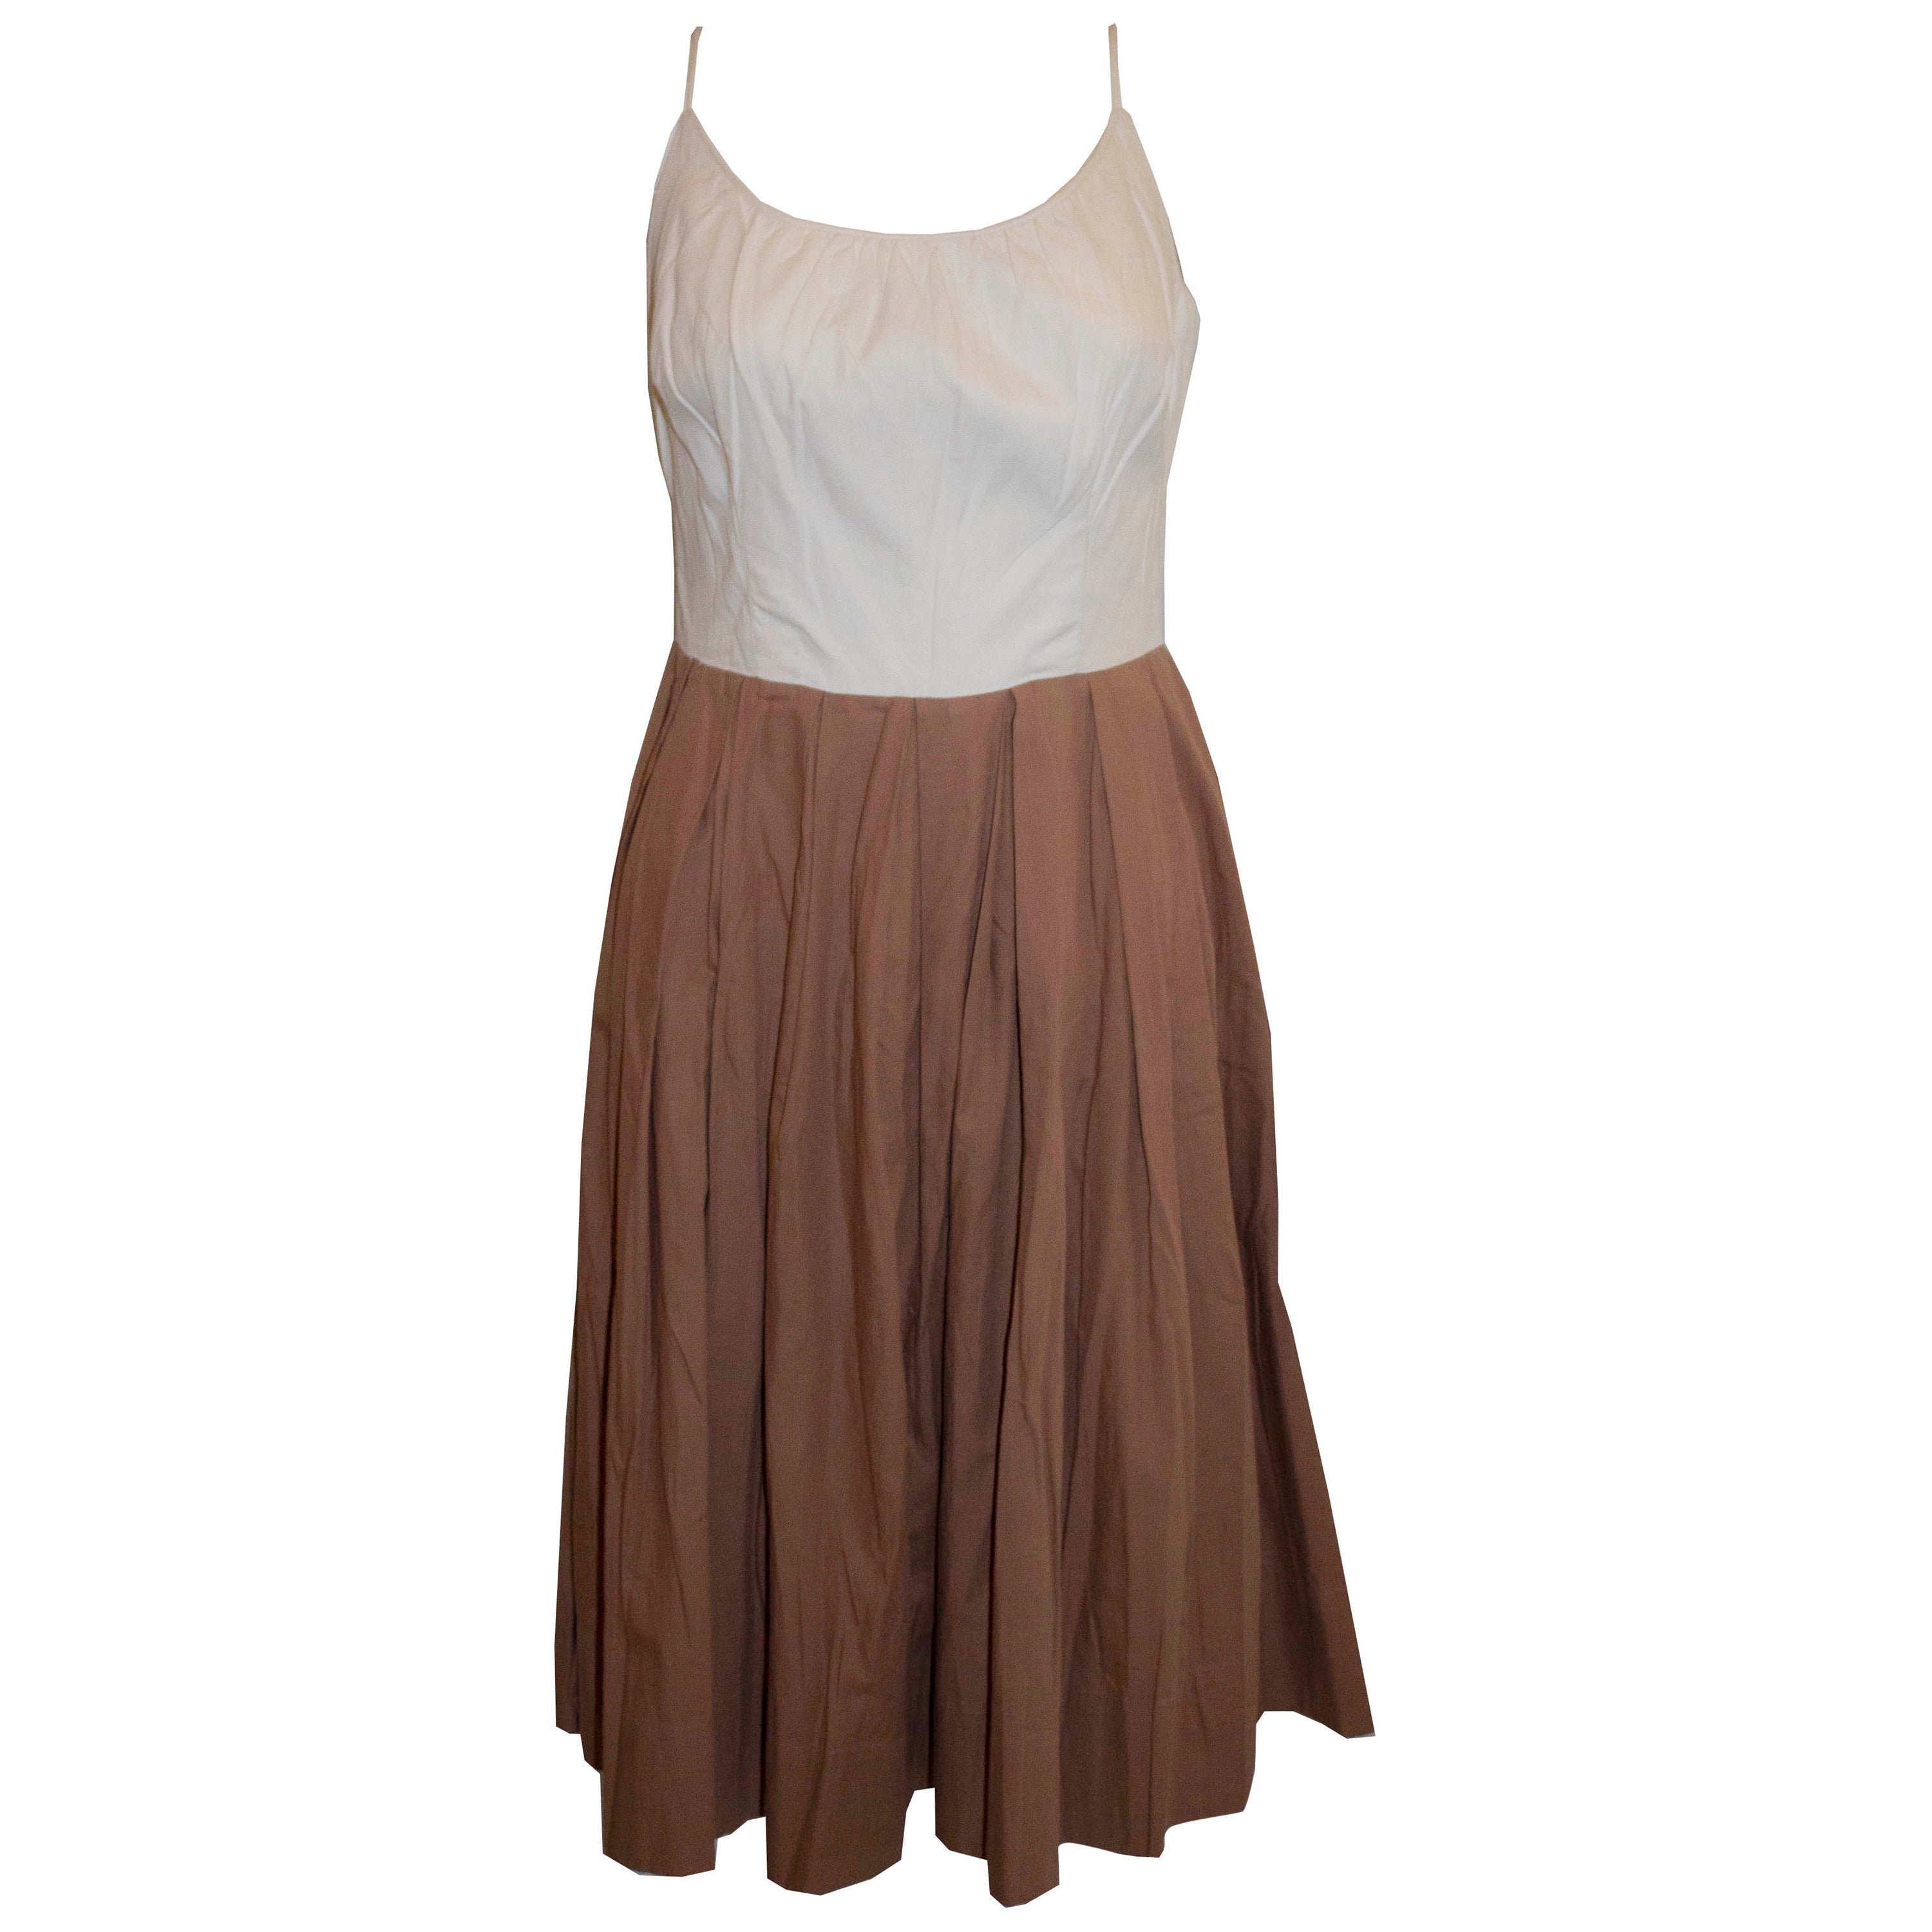 Vintage Brown and White Summer Cotton Dress For Sale